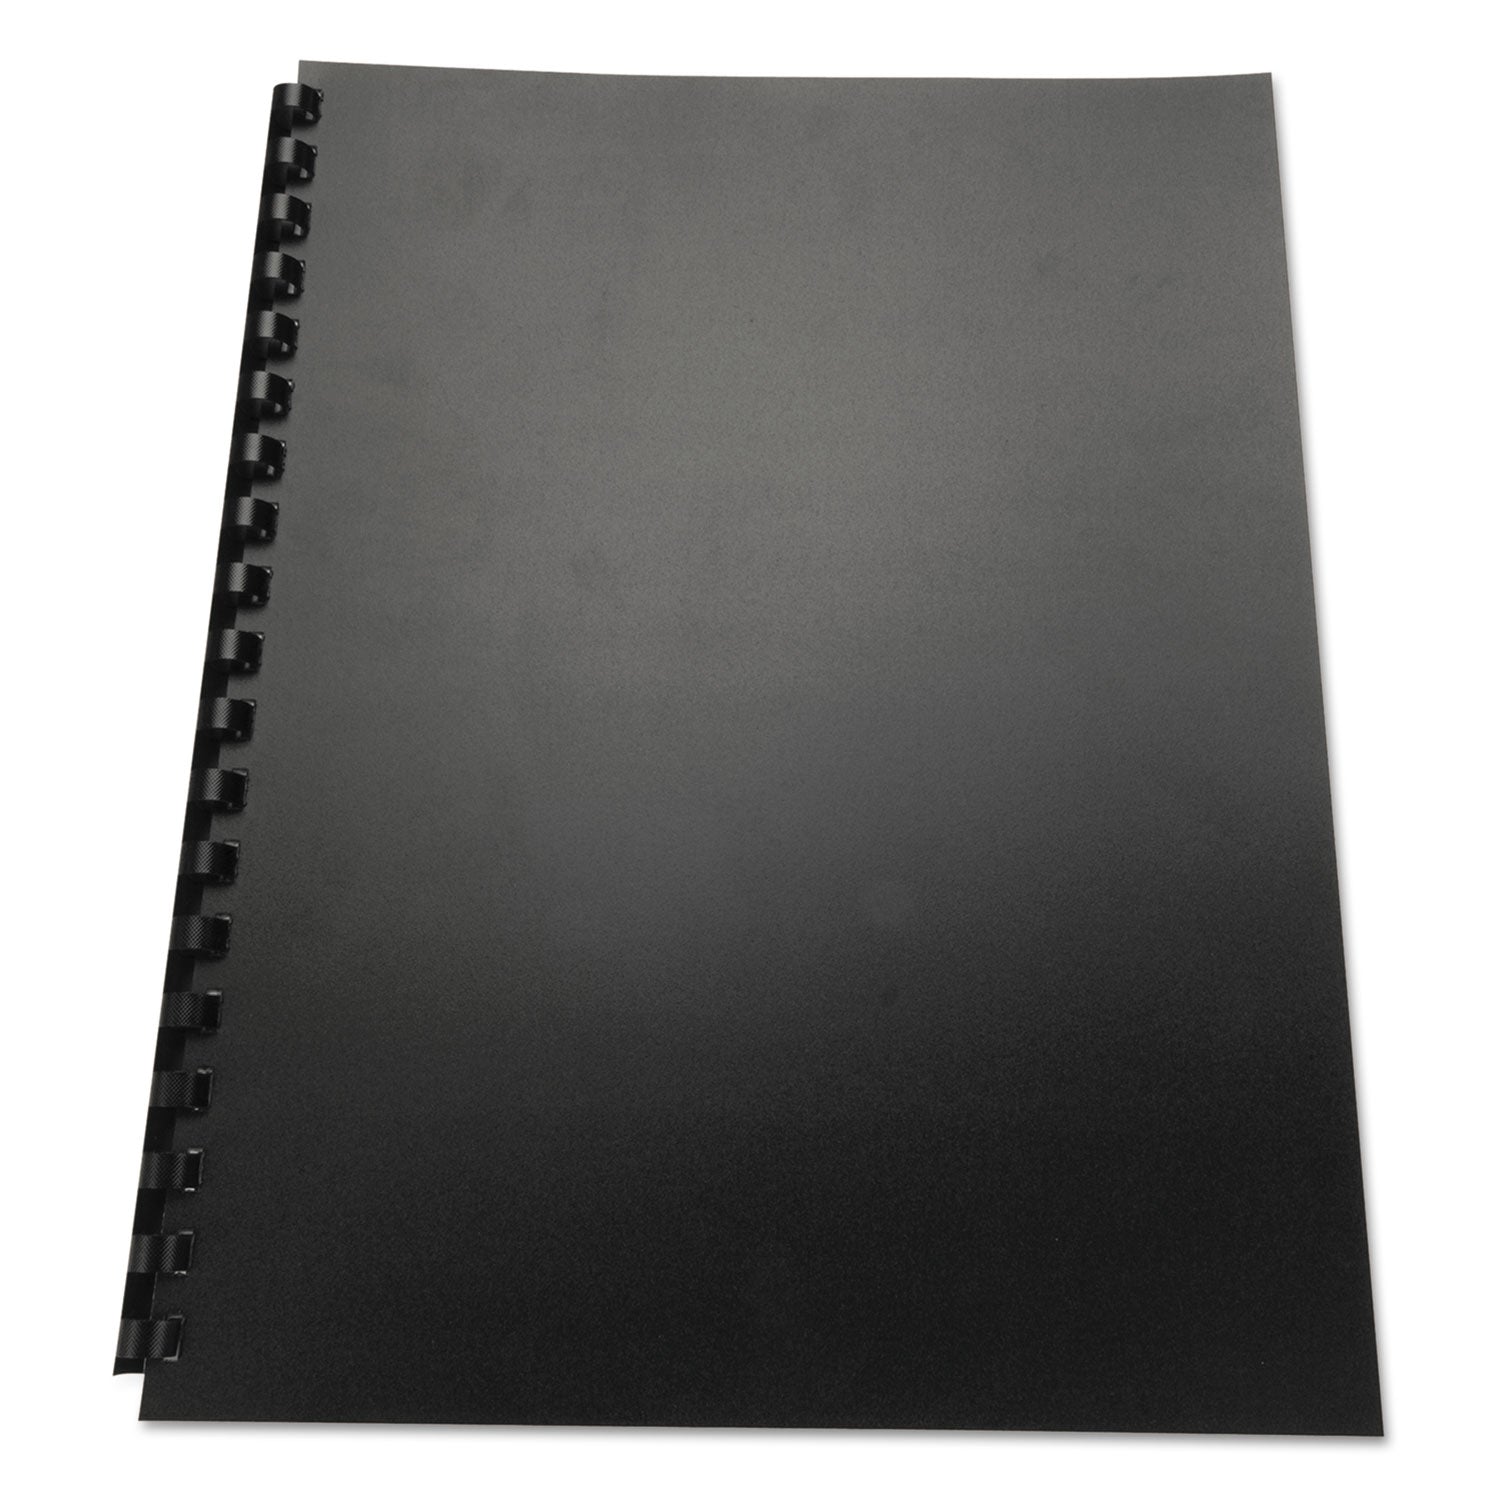 100%-recycled-poly-binding-cover-black-11-x-85-unpunched-25-pack_gbc25818 - 1